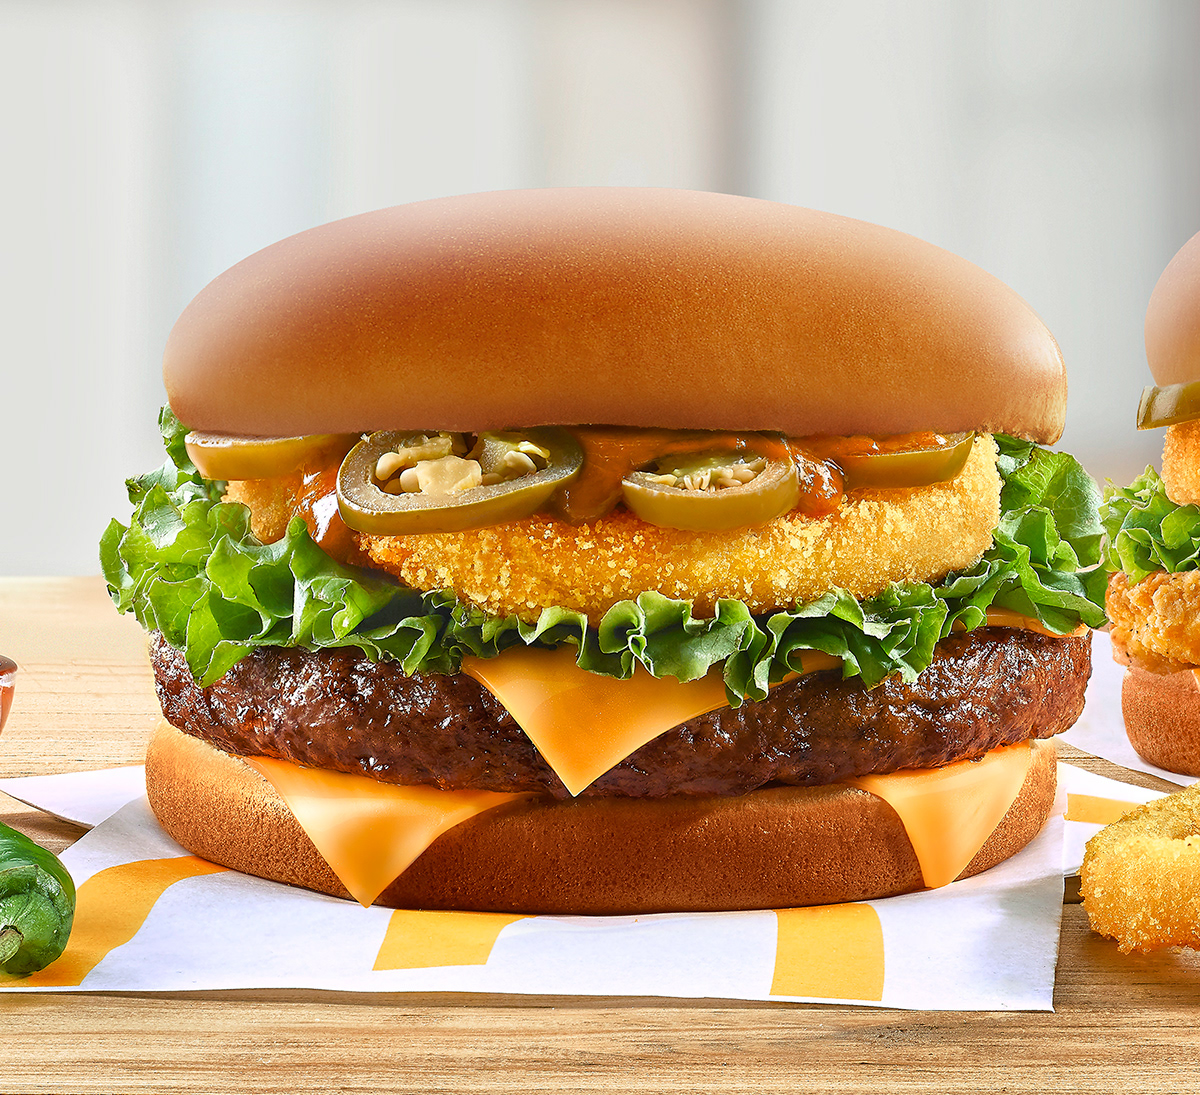 mcdonald's foodphotography foodstyling burger sandwich campaign